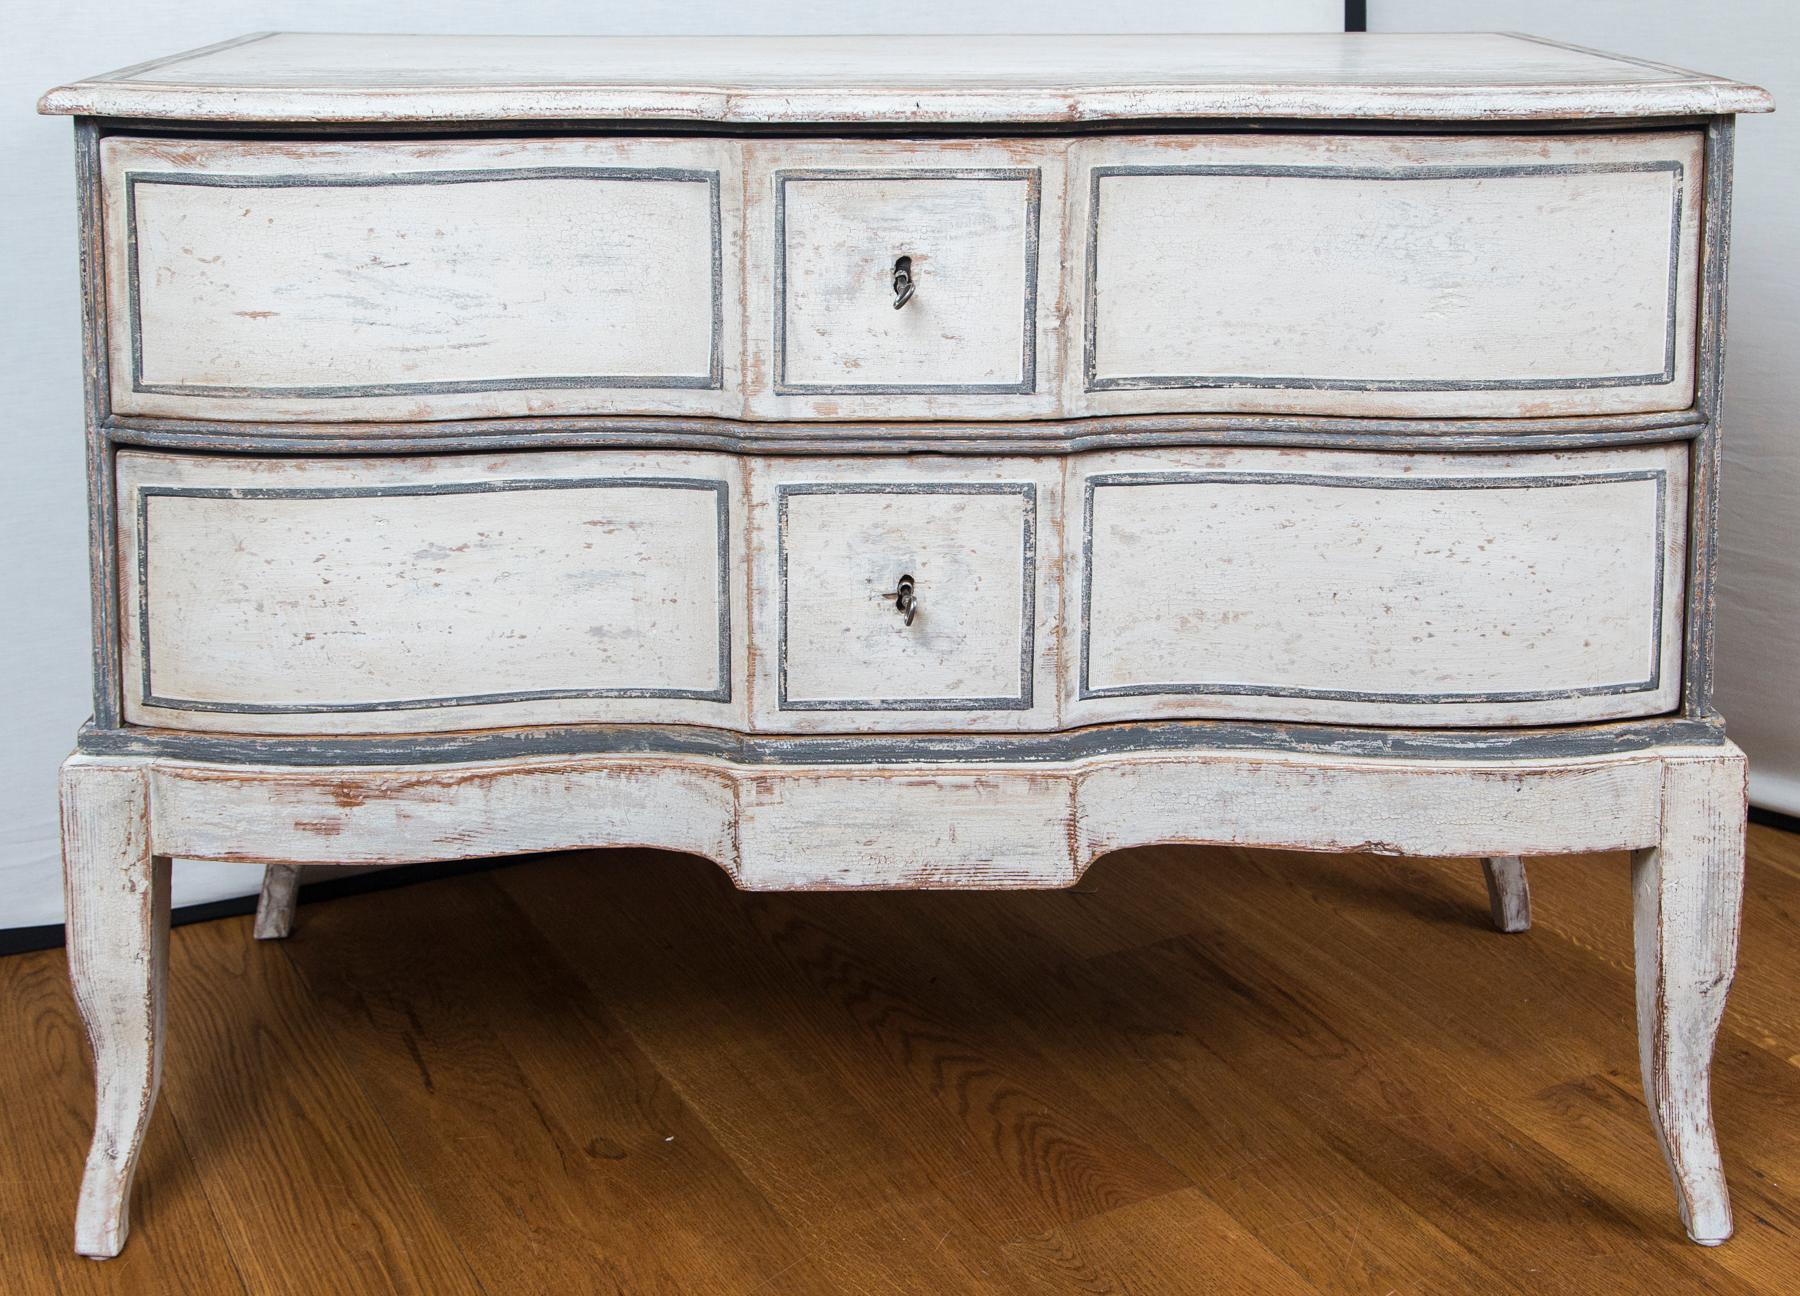 Lovely pair of large decorative baroque chests painted in an off white color with grey-blue detailing, comprised of two long drawers and finishing on high modified cabriole legs
Dating: circa 20th century with antique parts taken from an early circa